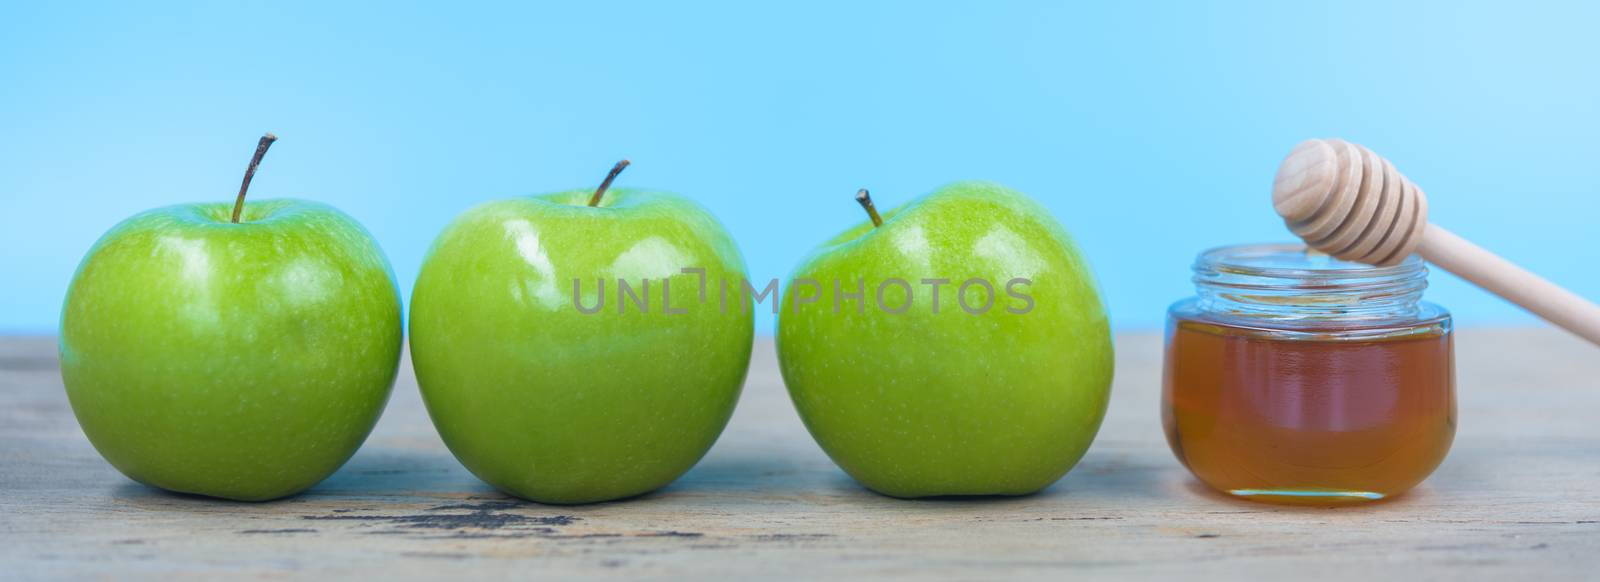 Jewish holiday, Apples Rosh Hashanah on the photo have honey in jar and green apples on wooden with blue background